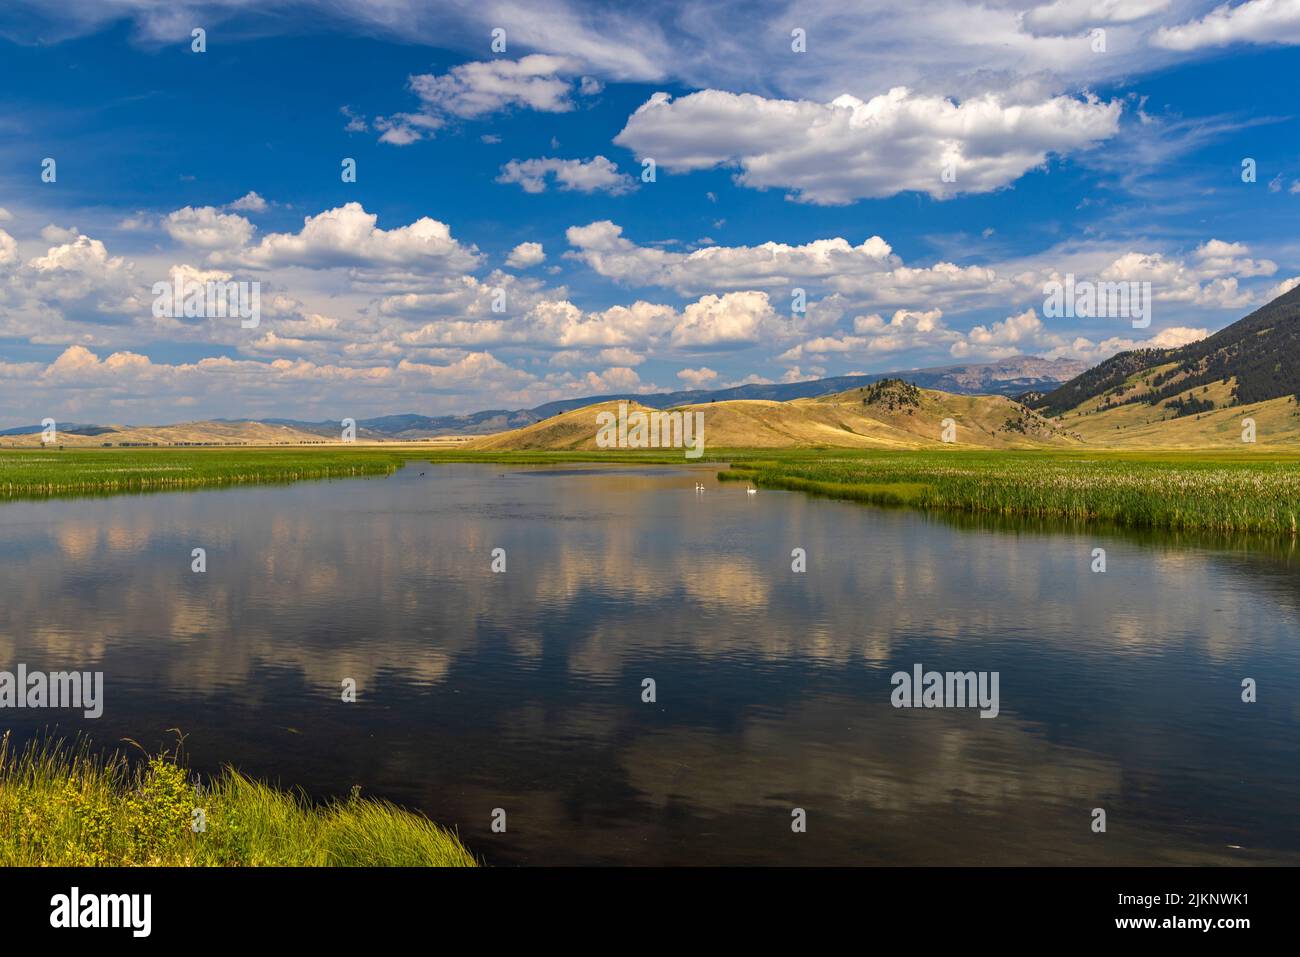 The clouds reflect on the water of Flat Creek at the National Elk Refuge in the Jackson Hole area of the state of Wyoming, USA.. Stock Photo